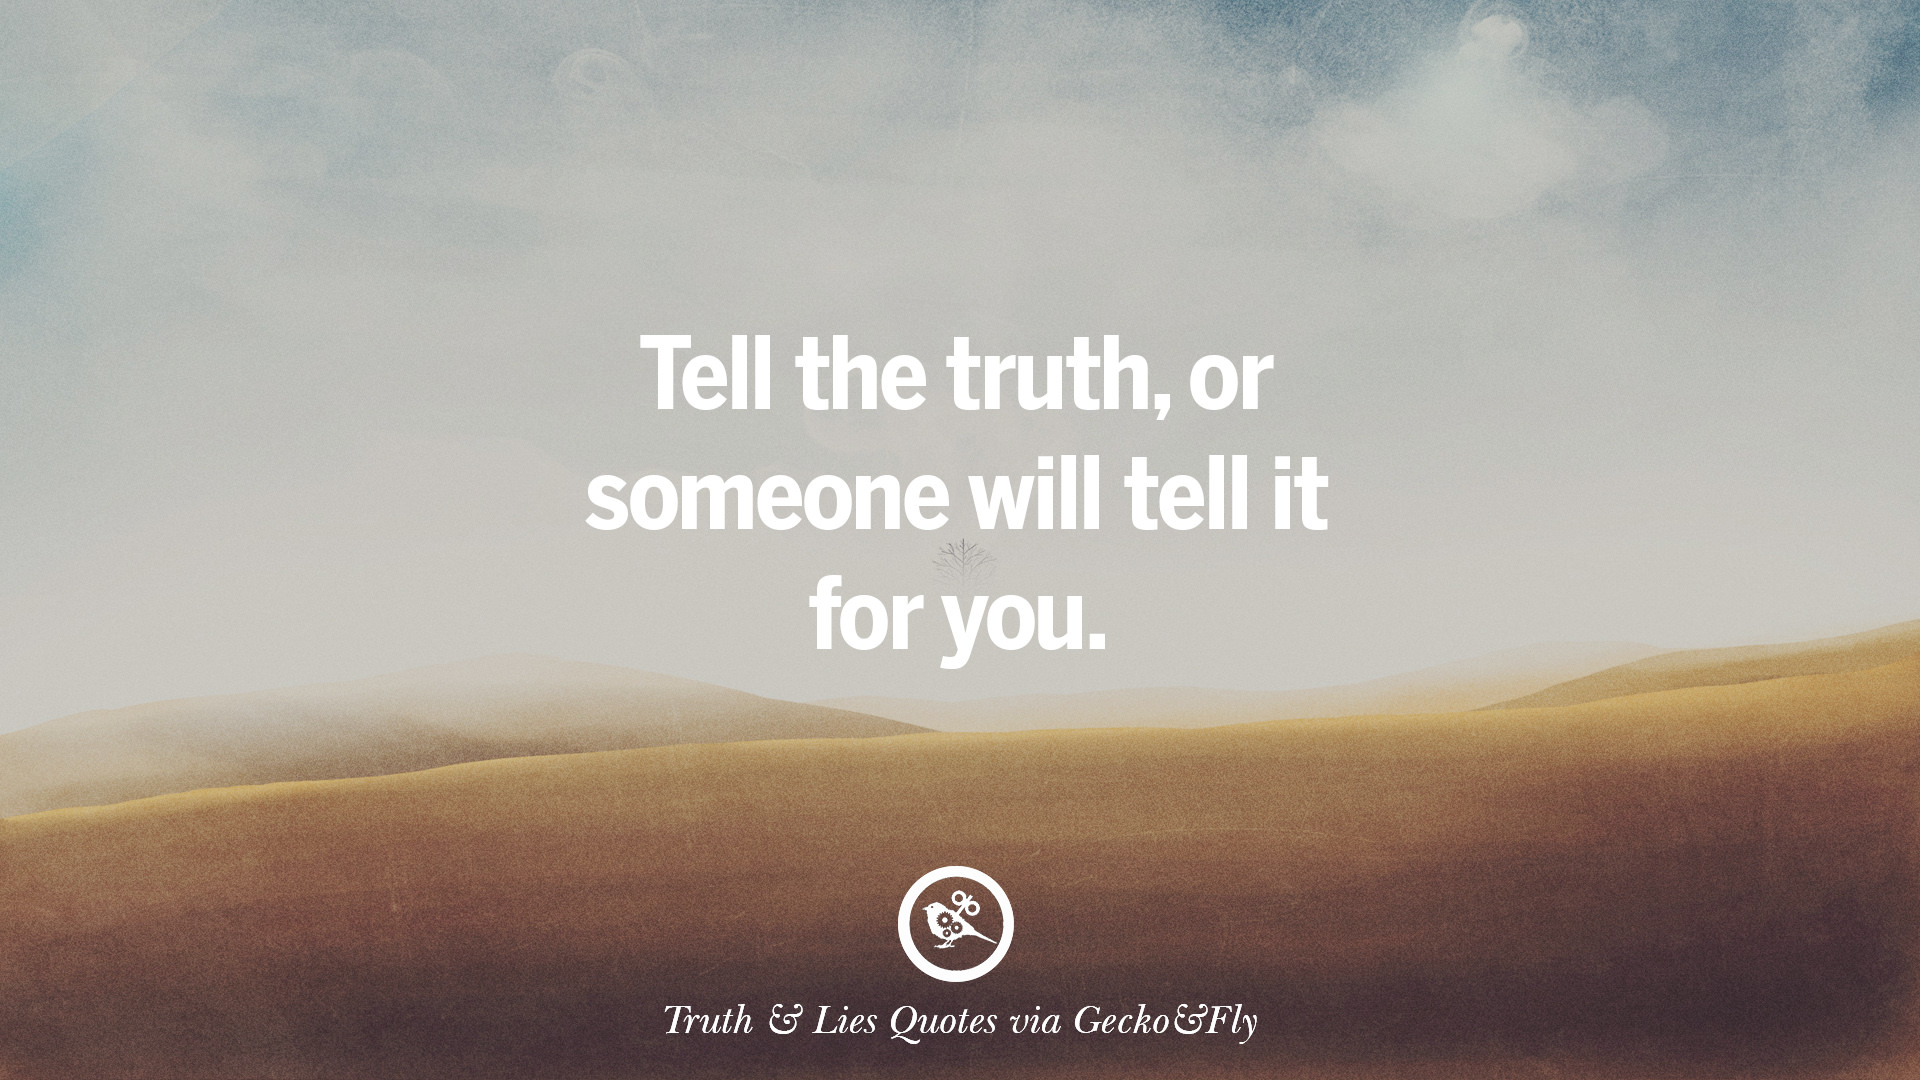 15 Quotes About Telling the Truth, Even When It's Hard